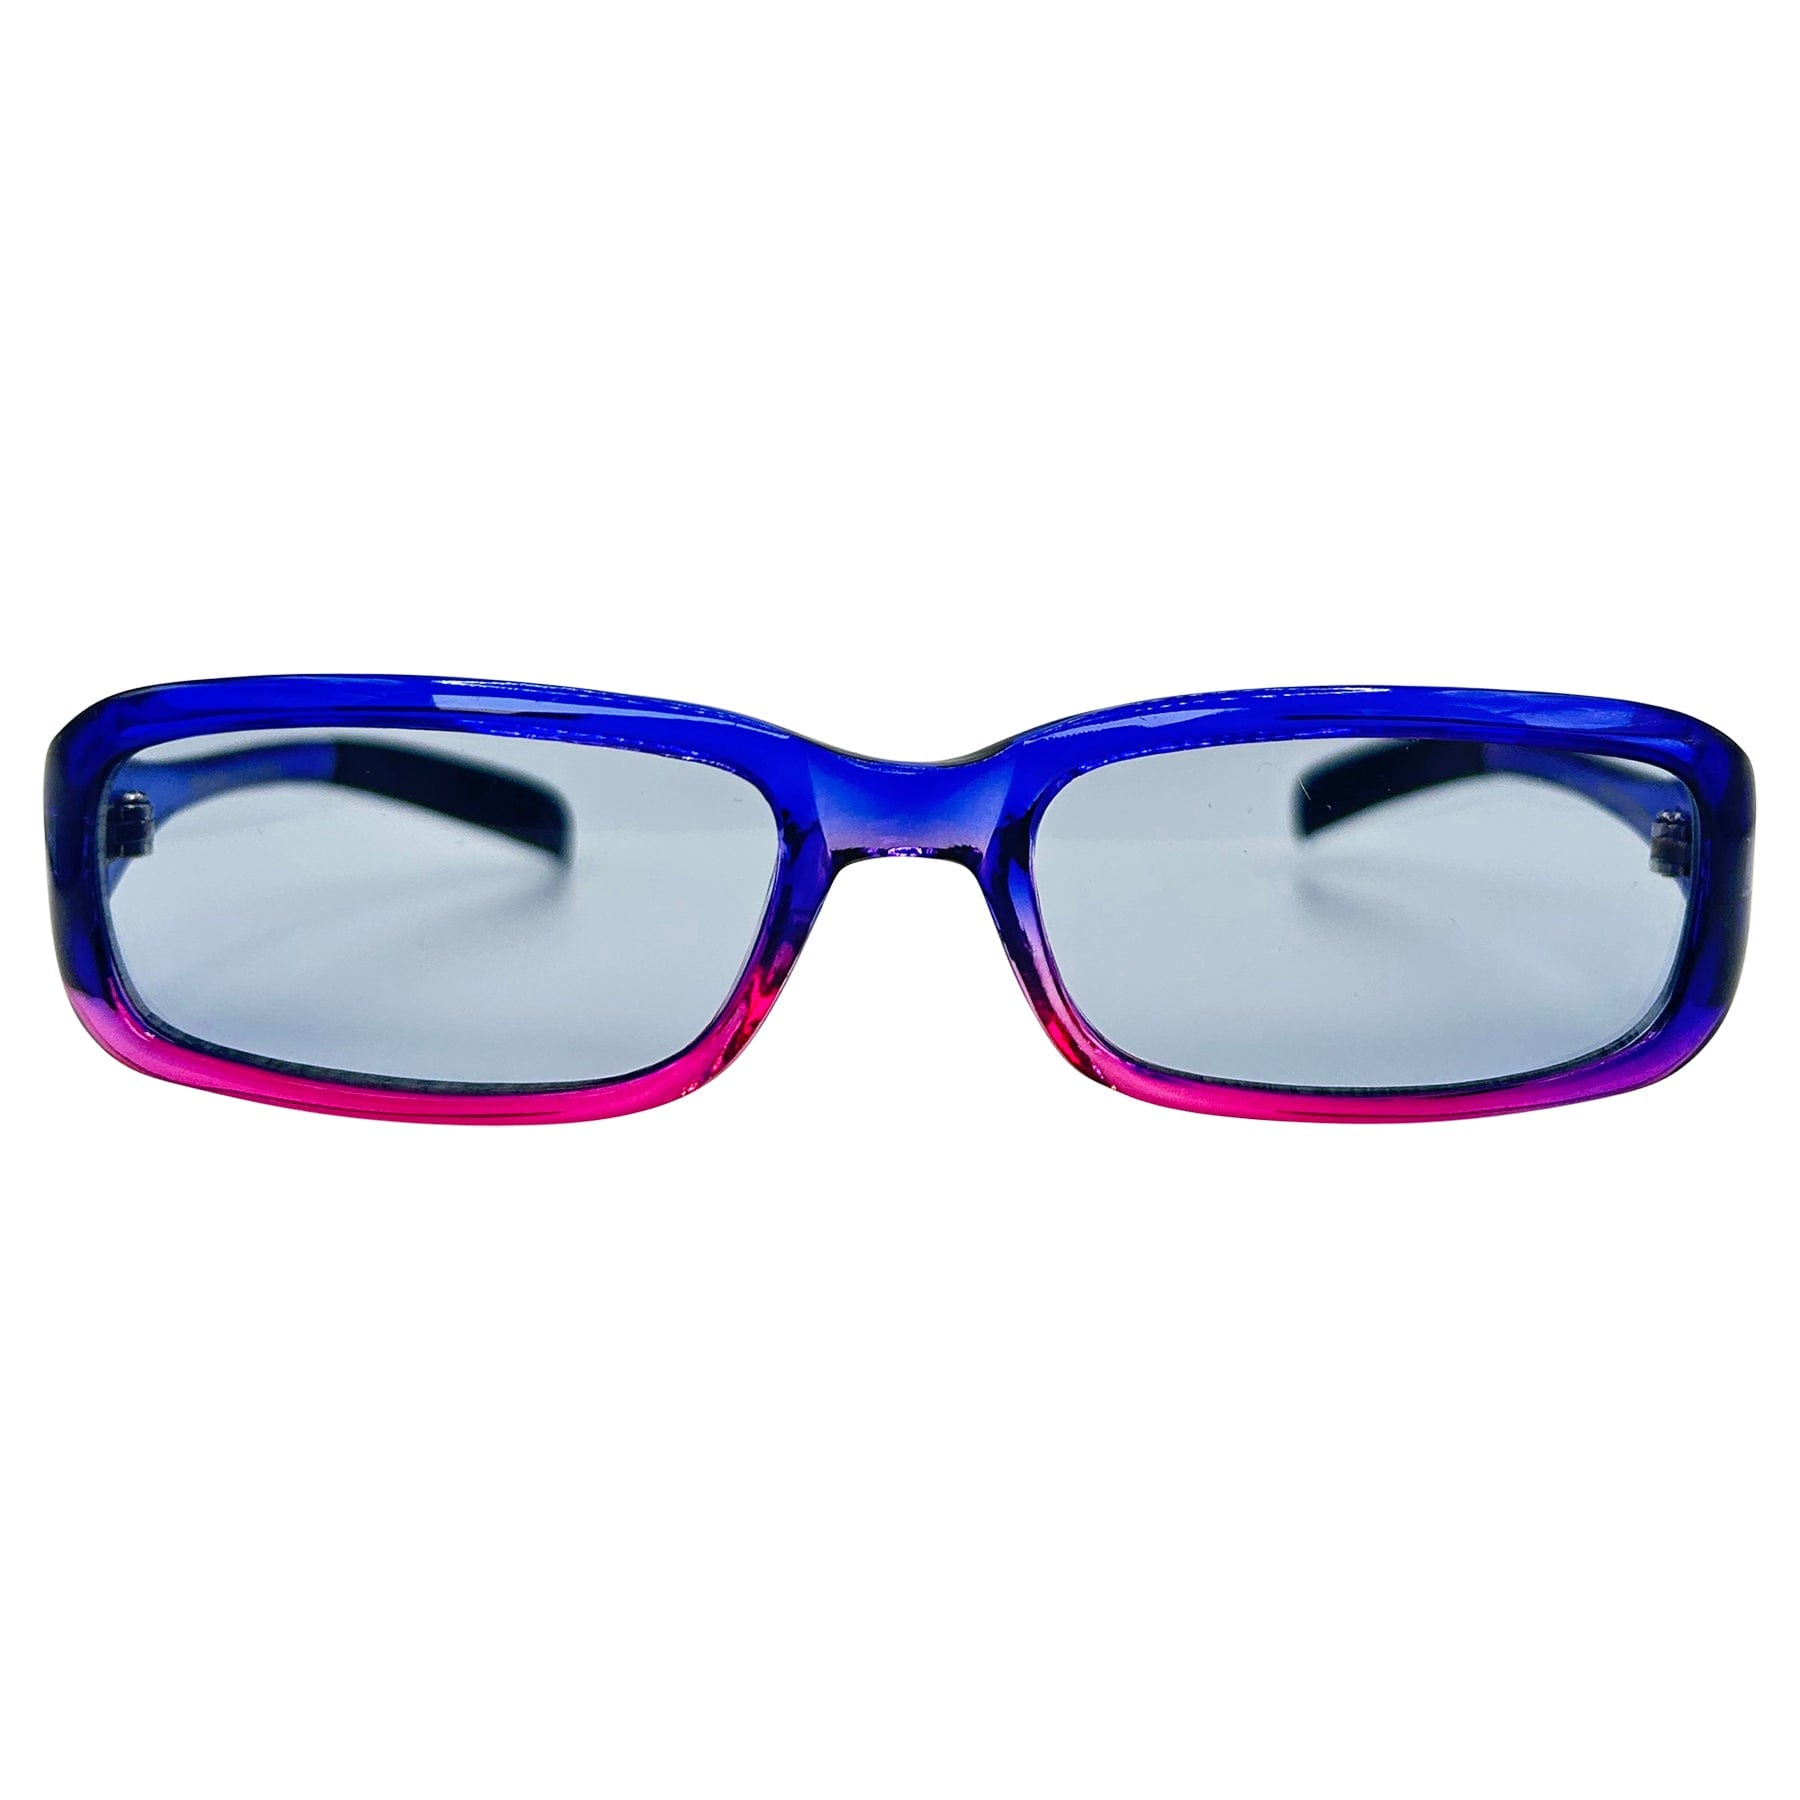 blue and purple faded colored sunglasses frames with a 90s style